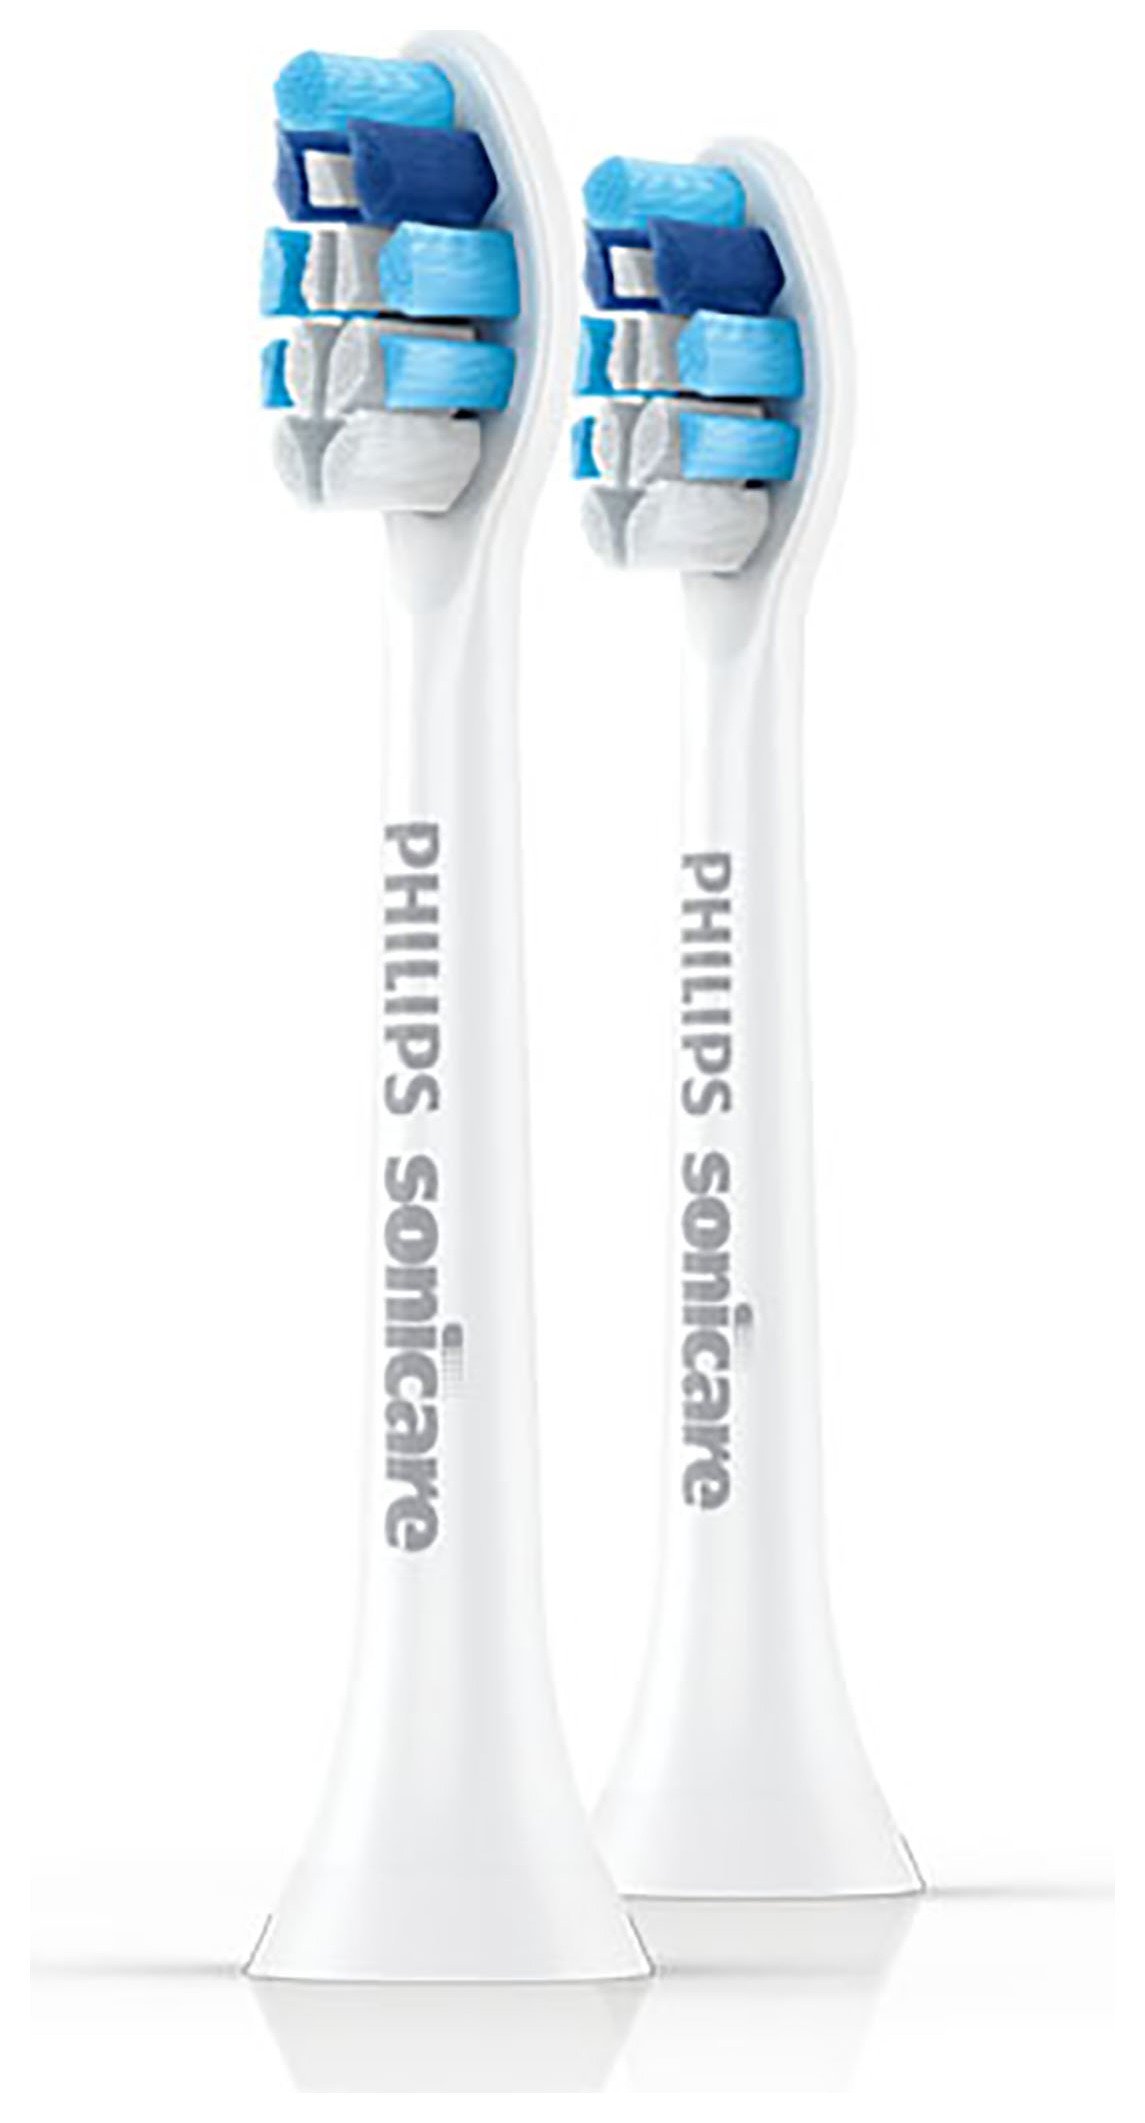 Philips - Sonicare HX9032 - Gum Health ProResults Brush Heads x2 Review